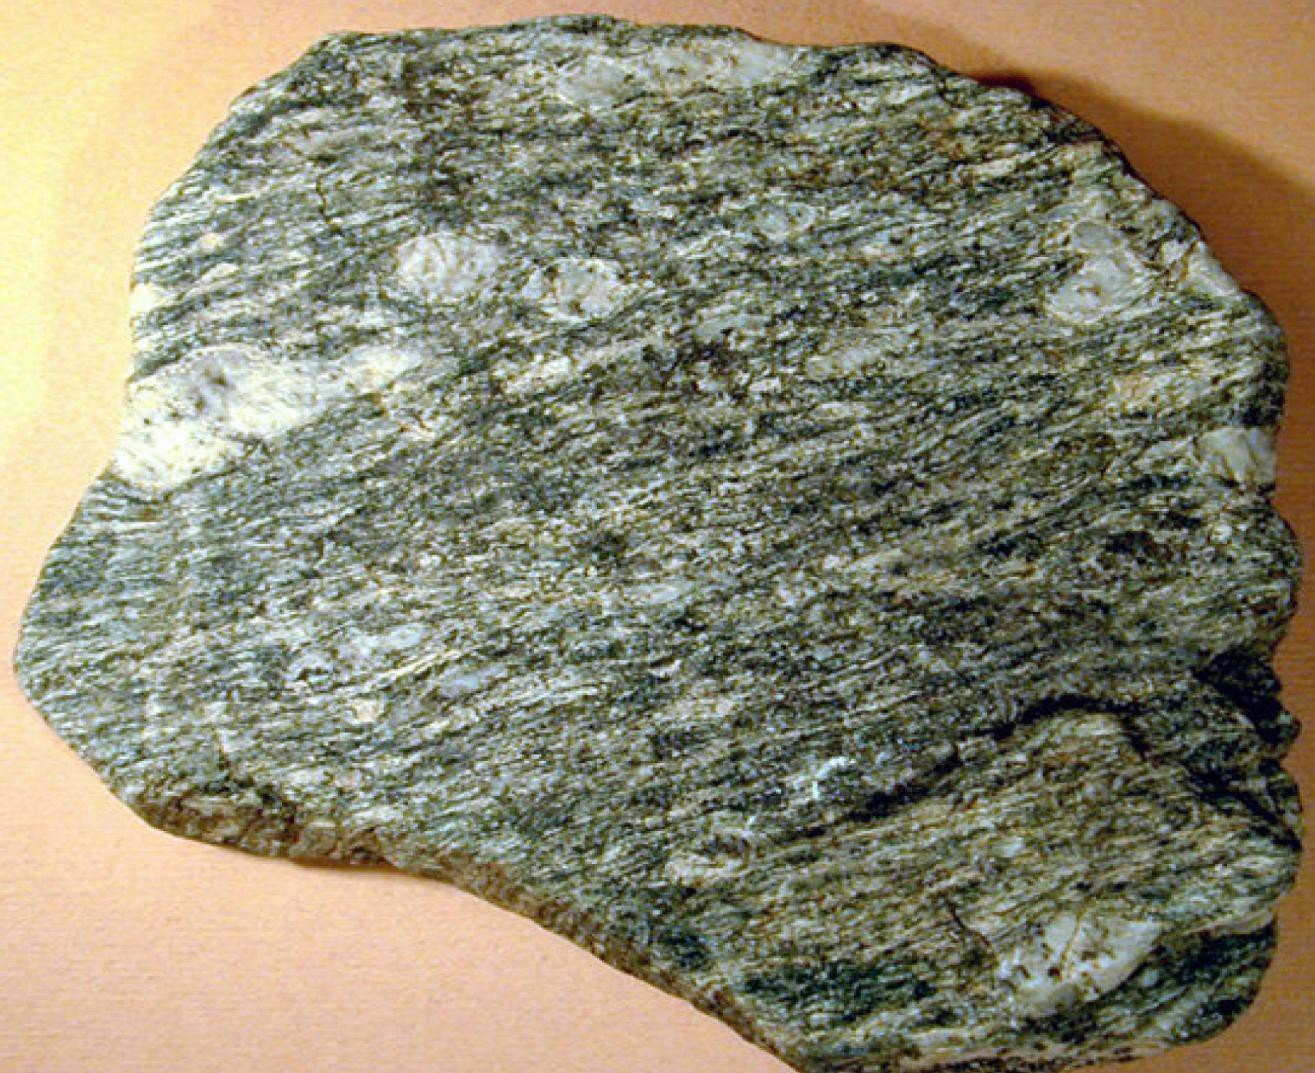 Gneiss is formed from granite, gabbros and diorite that minerals in distinct bands